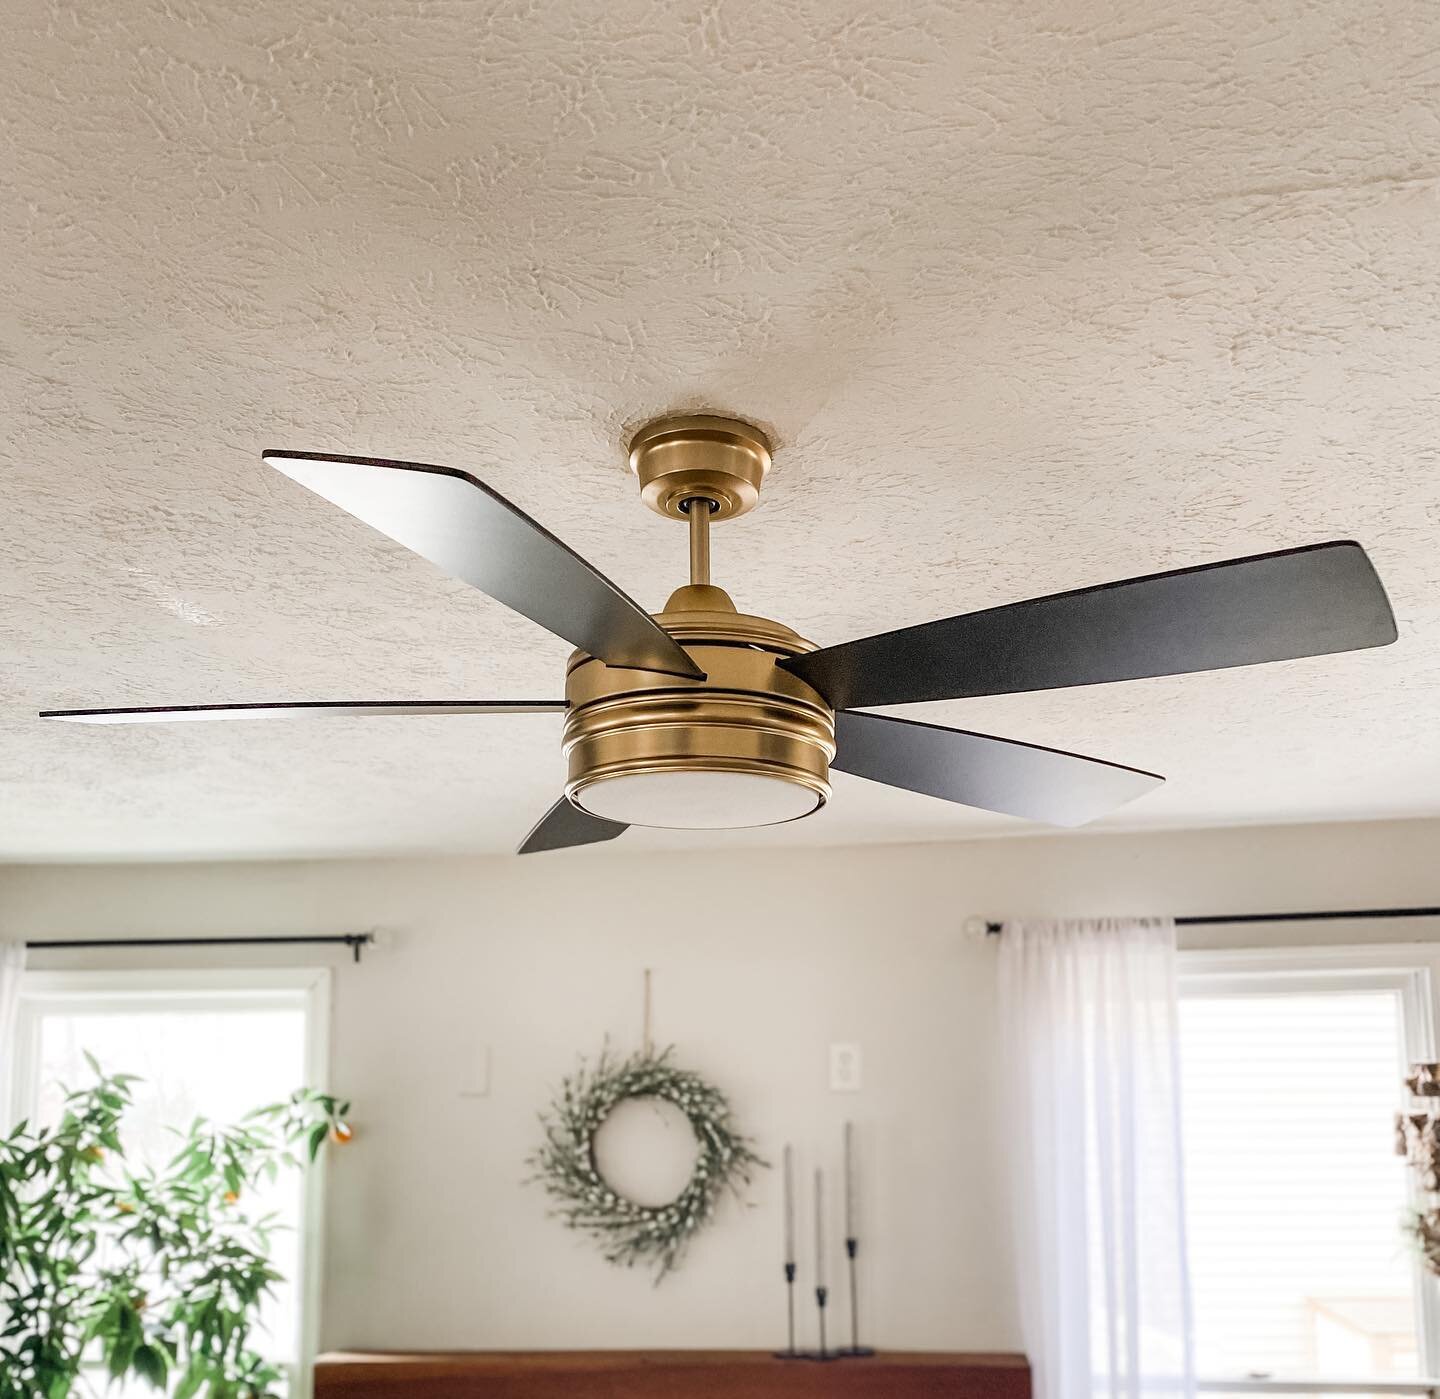 Sharing my latest obsession&hellip;fans. Anybody else? 🤔

Spring projects are getting underway at my house and this little update made a huge difference! Of course now every room &ldquo;needs&rdquo; a new fan so cue hours &amp; hours of research.😆
